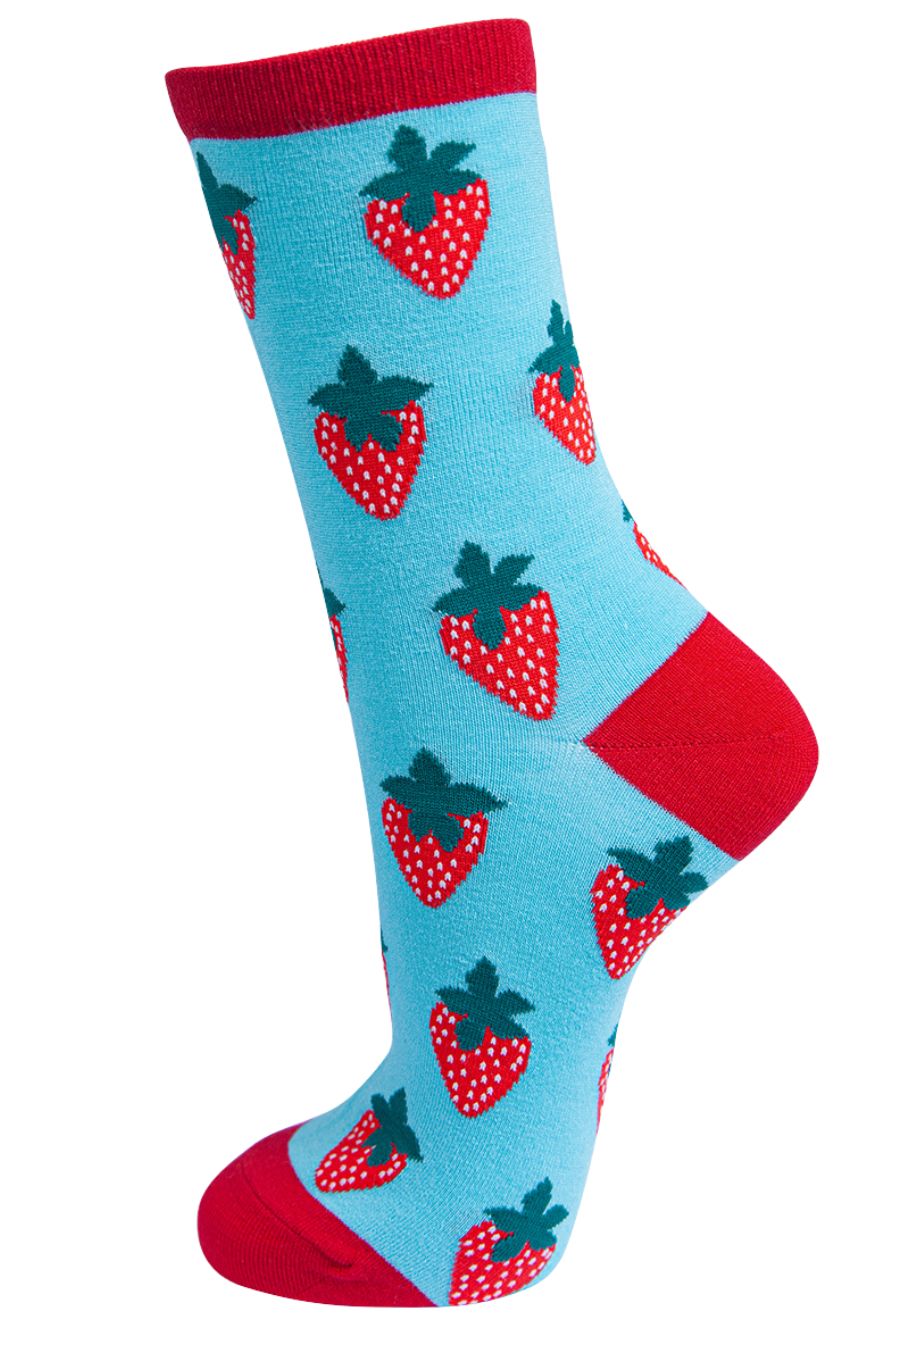 blue ankle socks with all over red strawberries